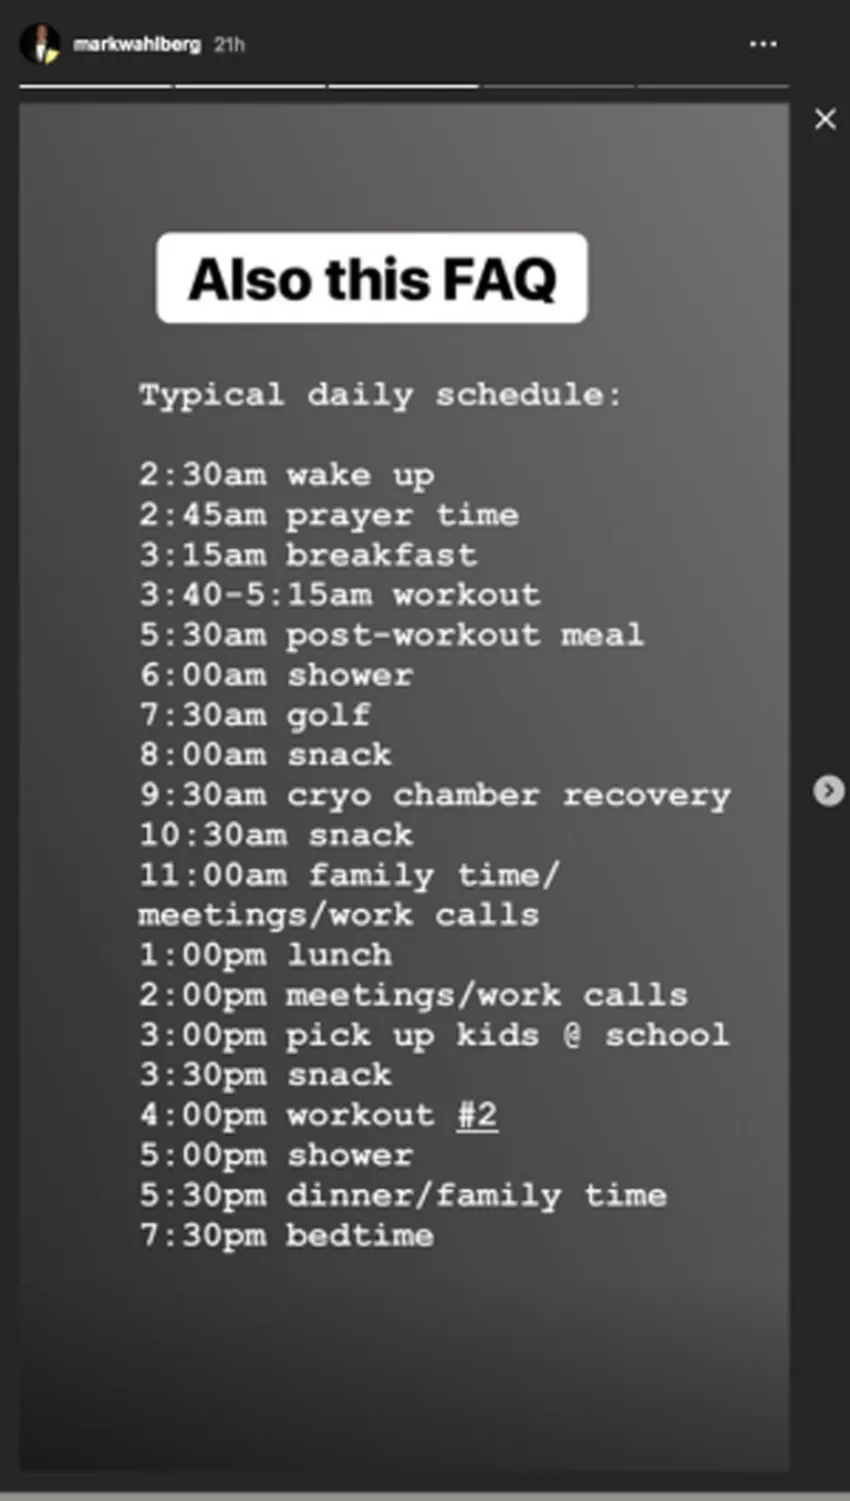 wahlberg workout schedule resized